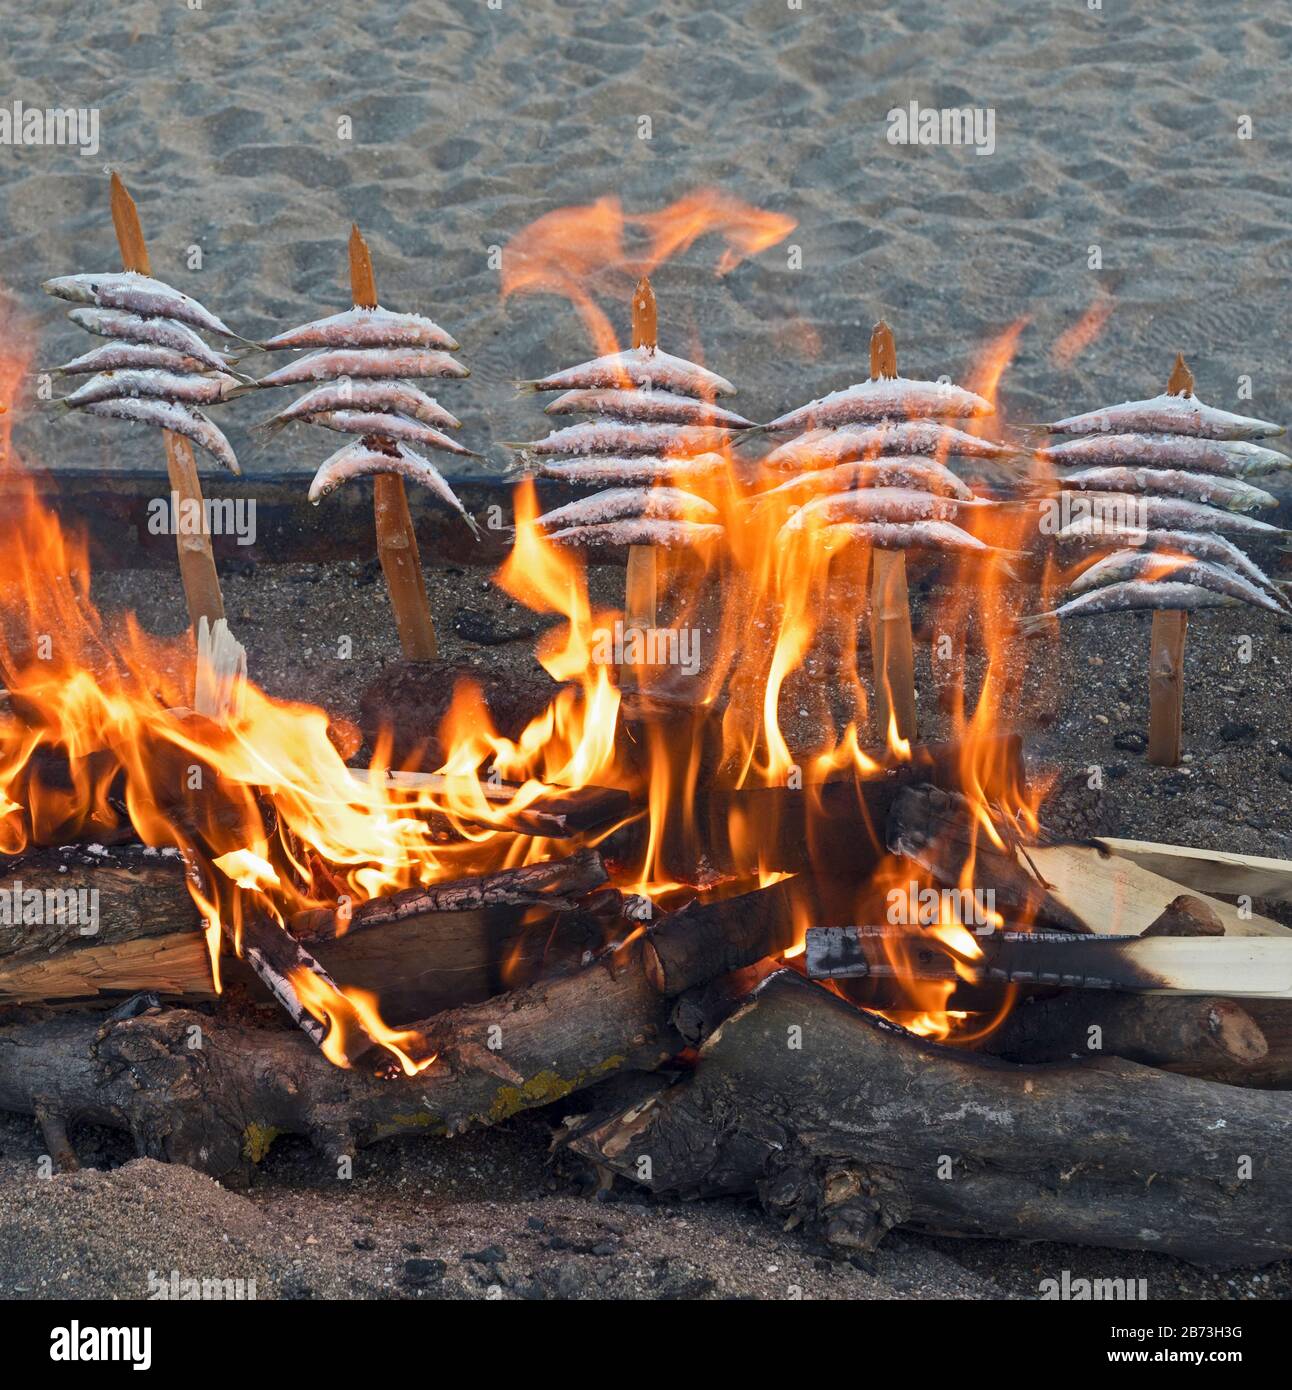 Skewers, or espetos, of sardines roasting on an open fire.  Typical dish on the Spanish Mediterranean. Stock Photo